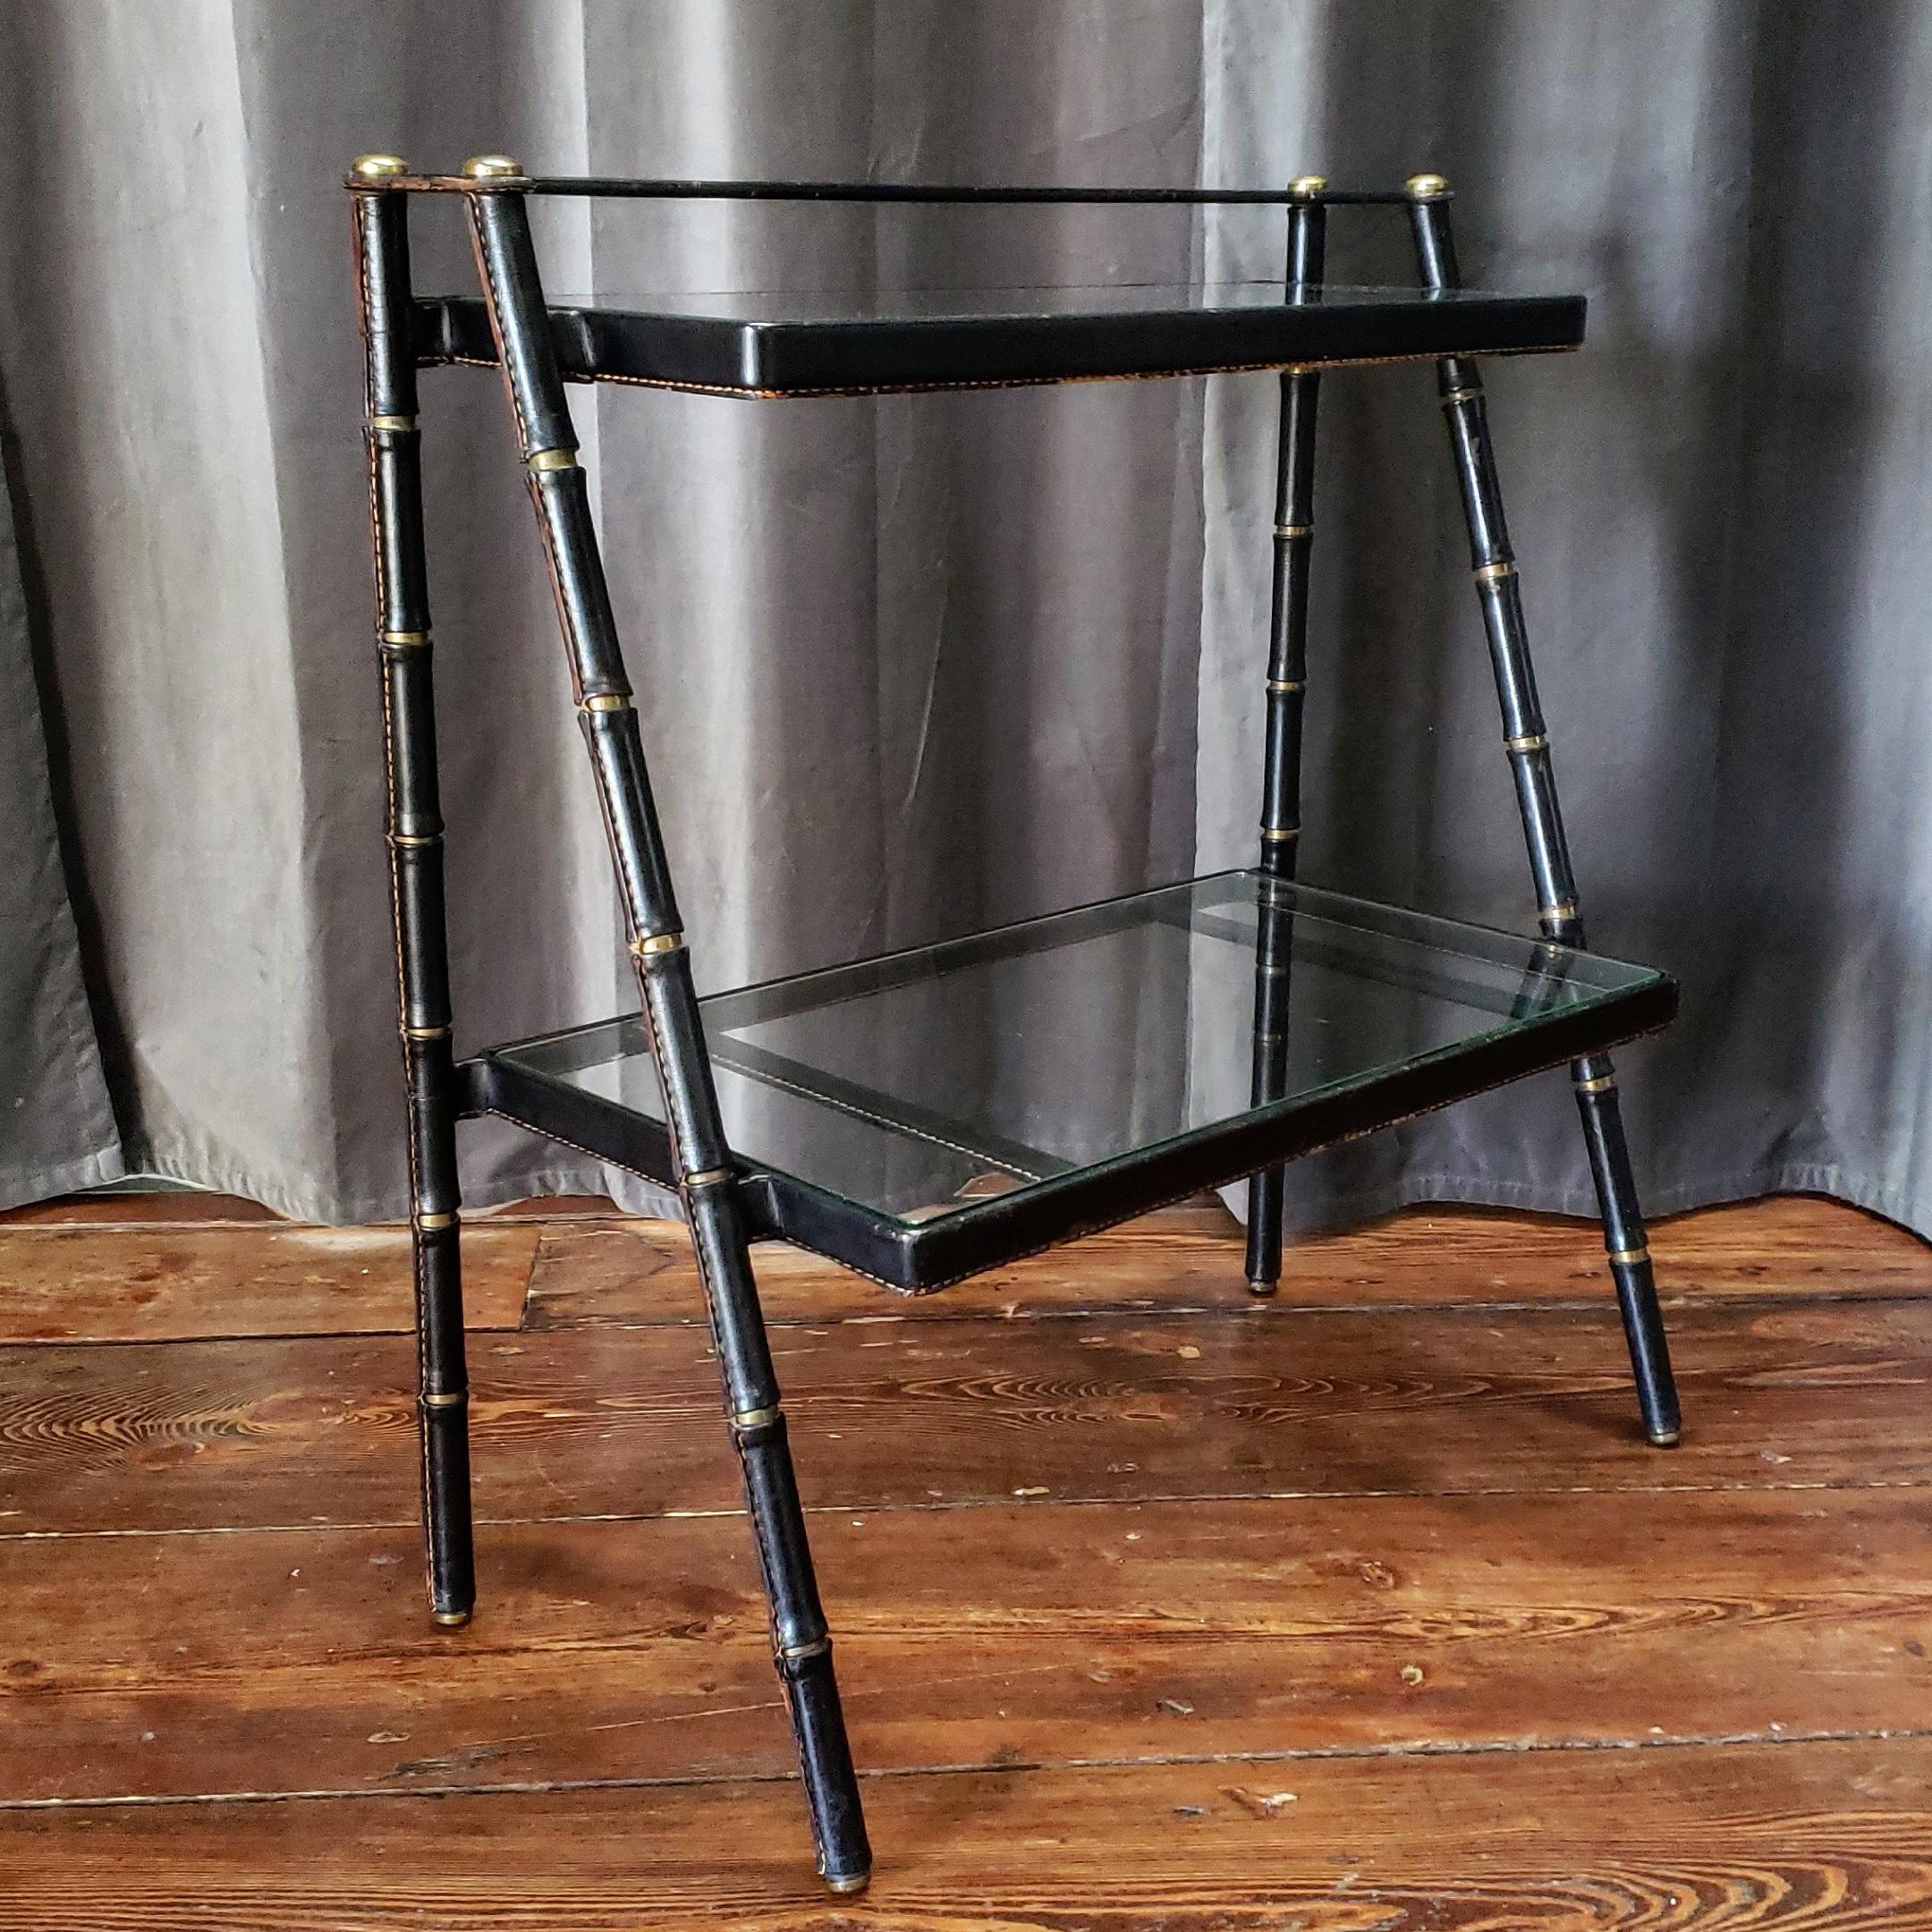 Incredible black leather two tiered shelf by Jacques Adnet with signature saddle stitched faux bamboo legs, original glass and bronze hardware detailing.
This would make an excellent bar. bookcase, nigh stand, side table, bathroom towel shelf.  The